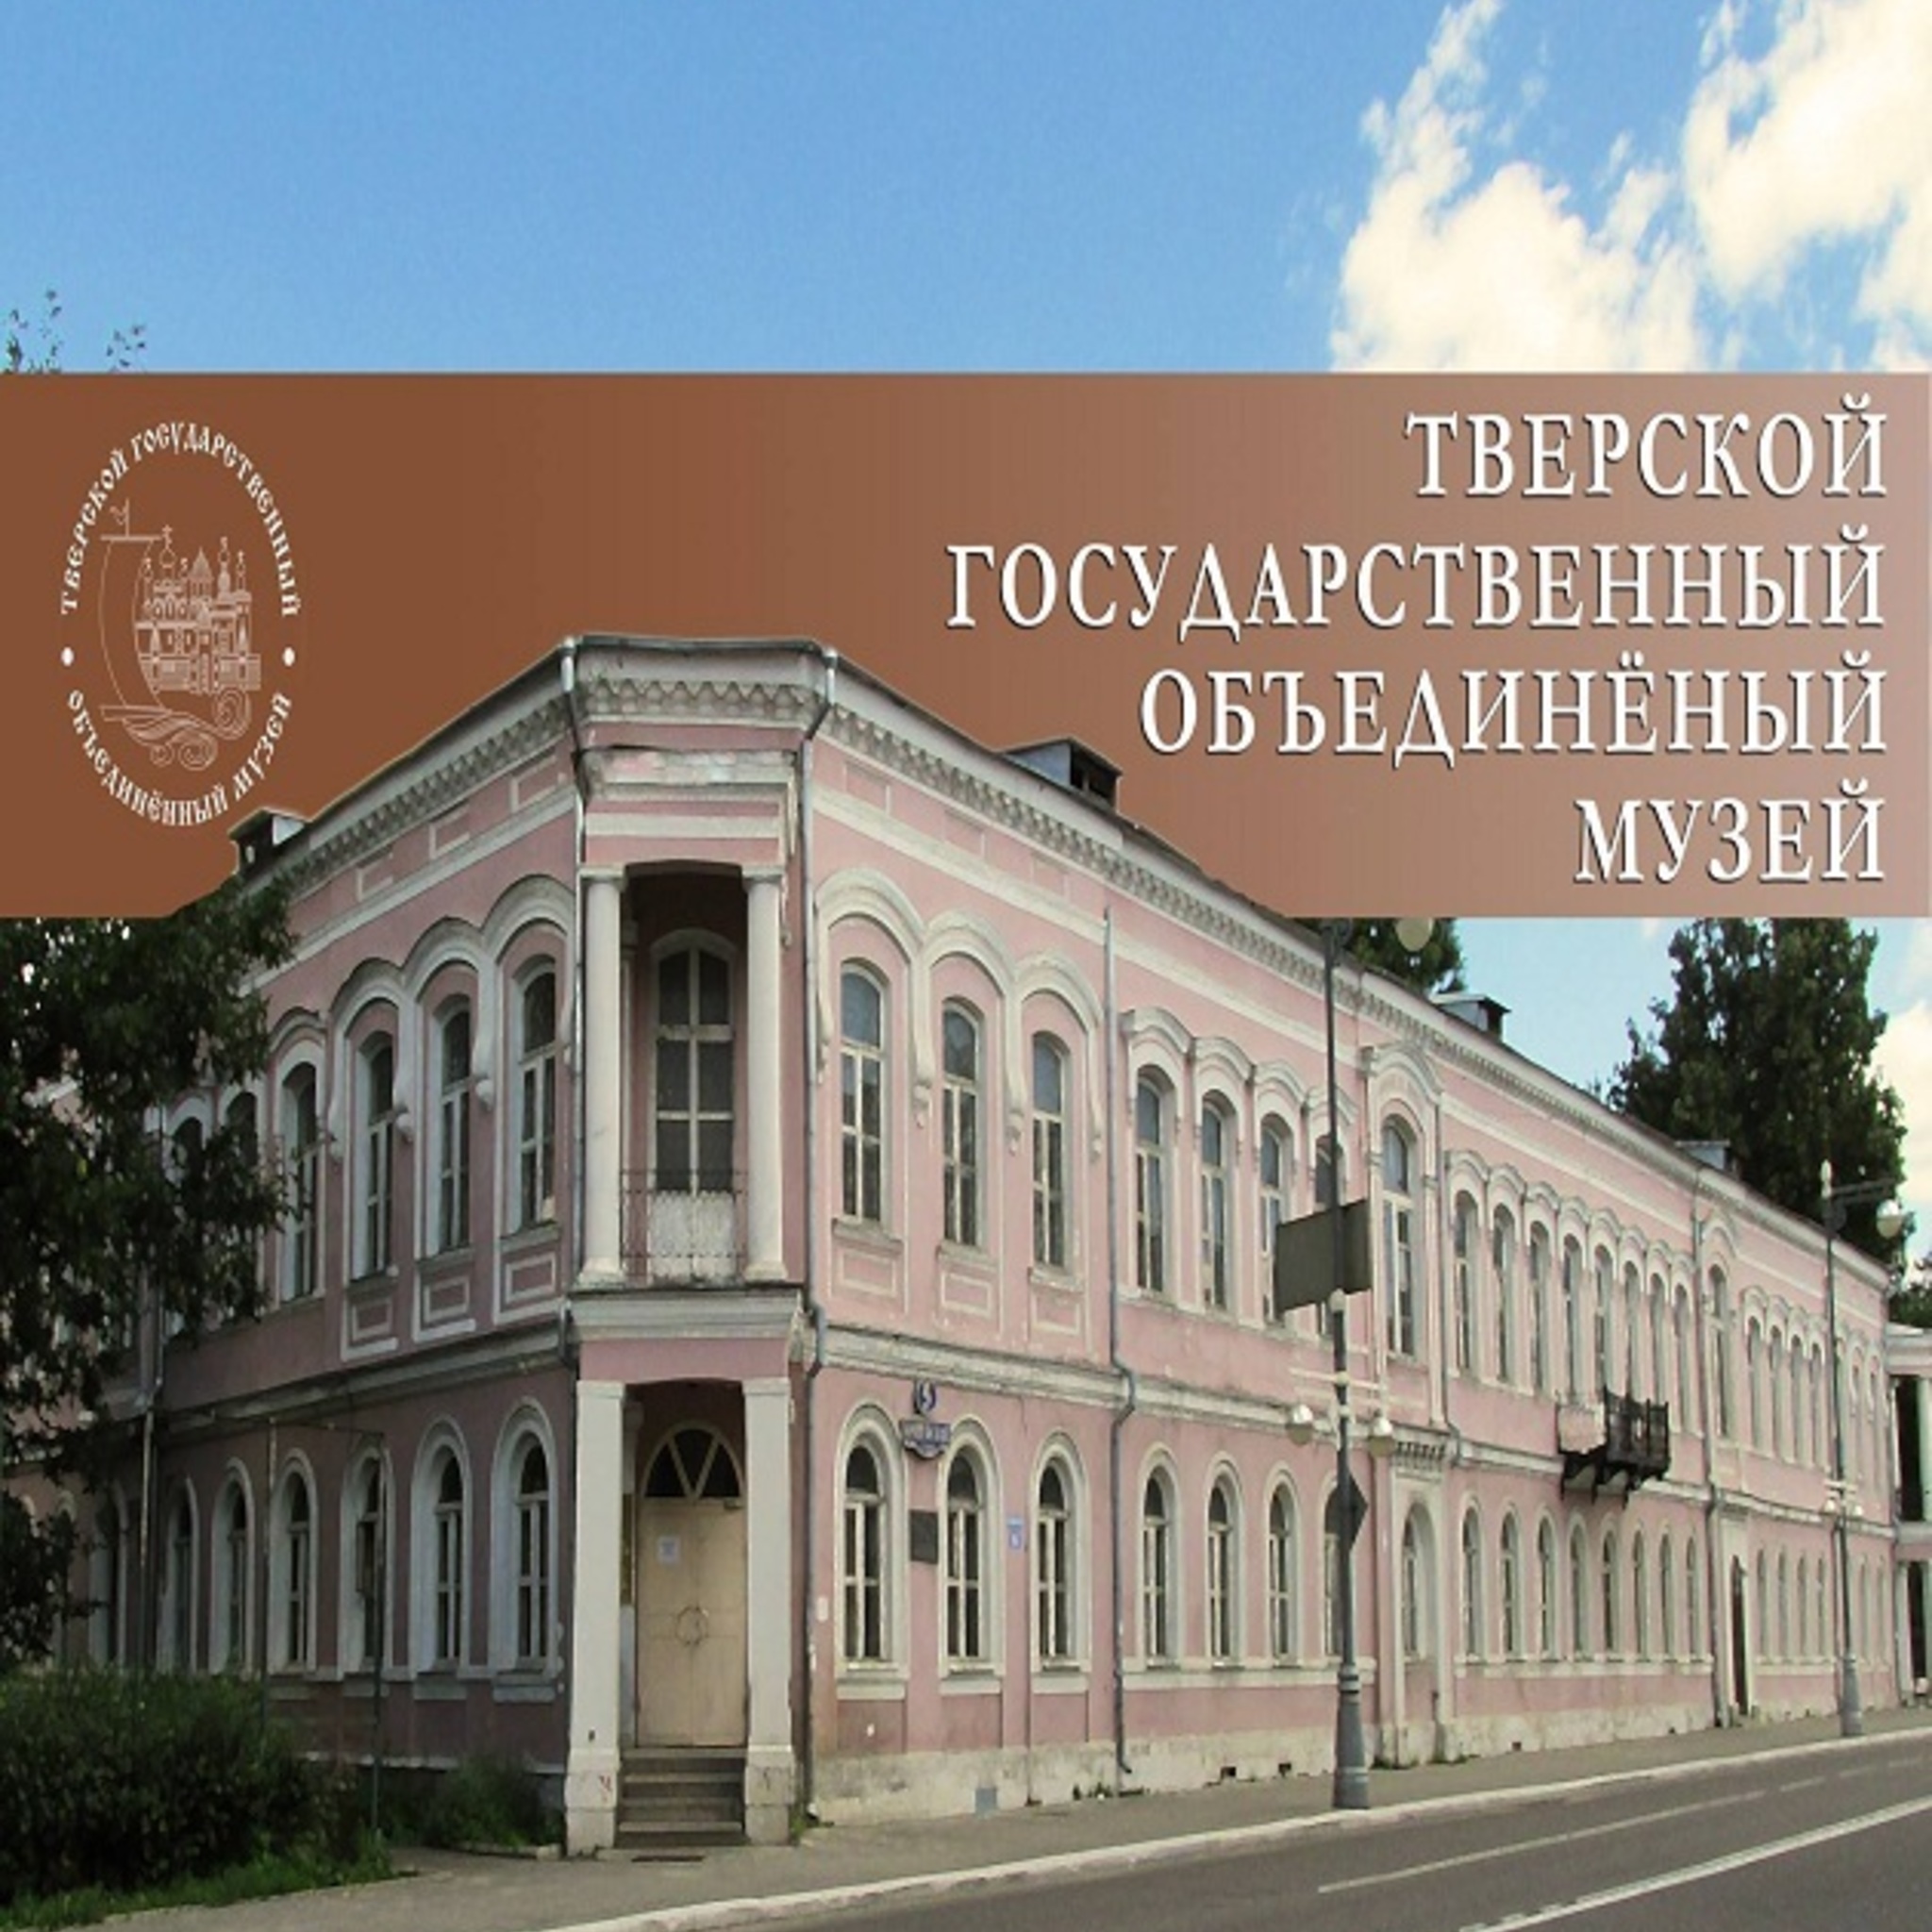 Our events Tver State United Museum on August 2015